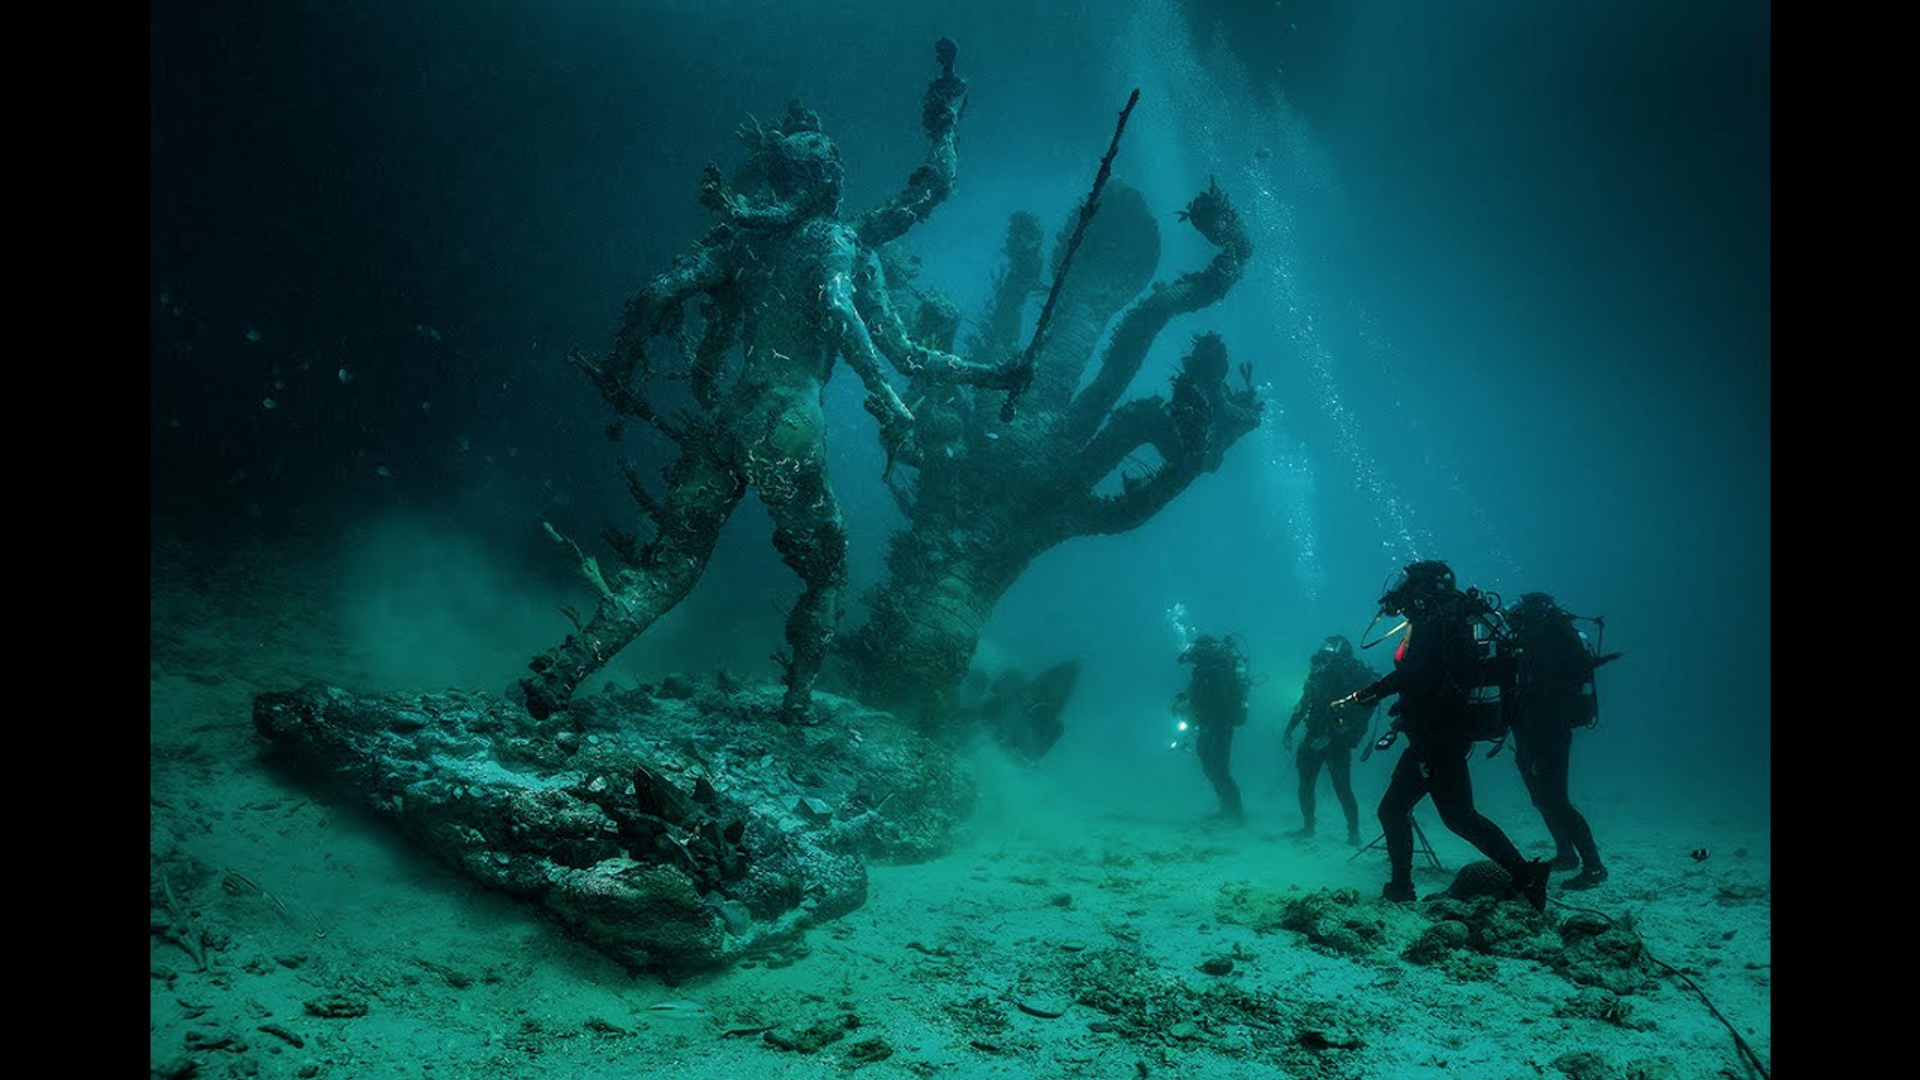 Damien Hirst's Submerged Fantasy: Treasures From The Wreck Of The Unbelievable